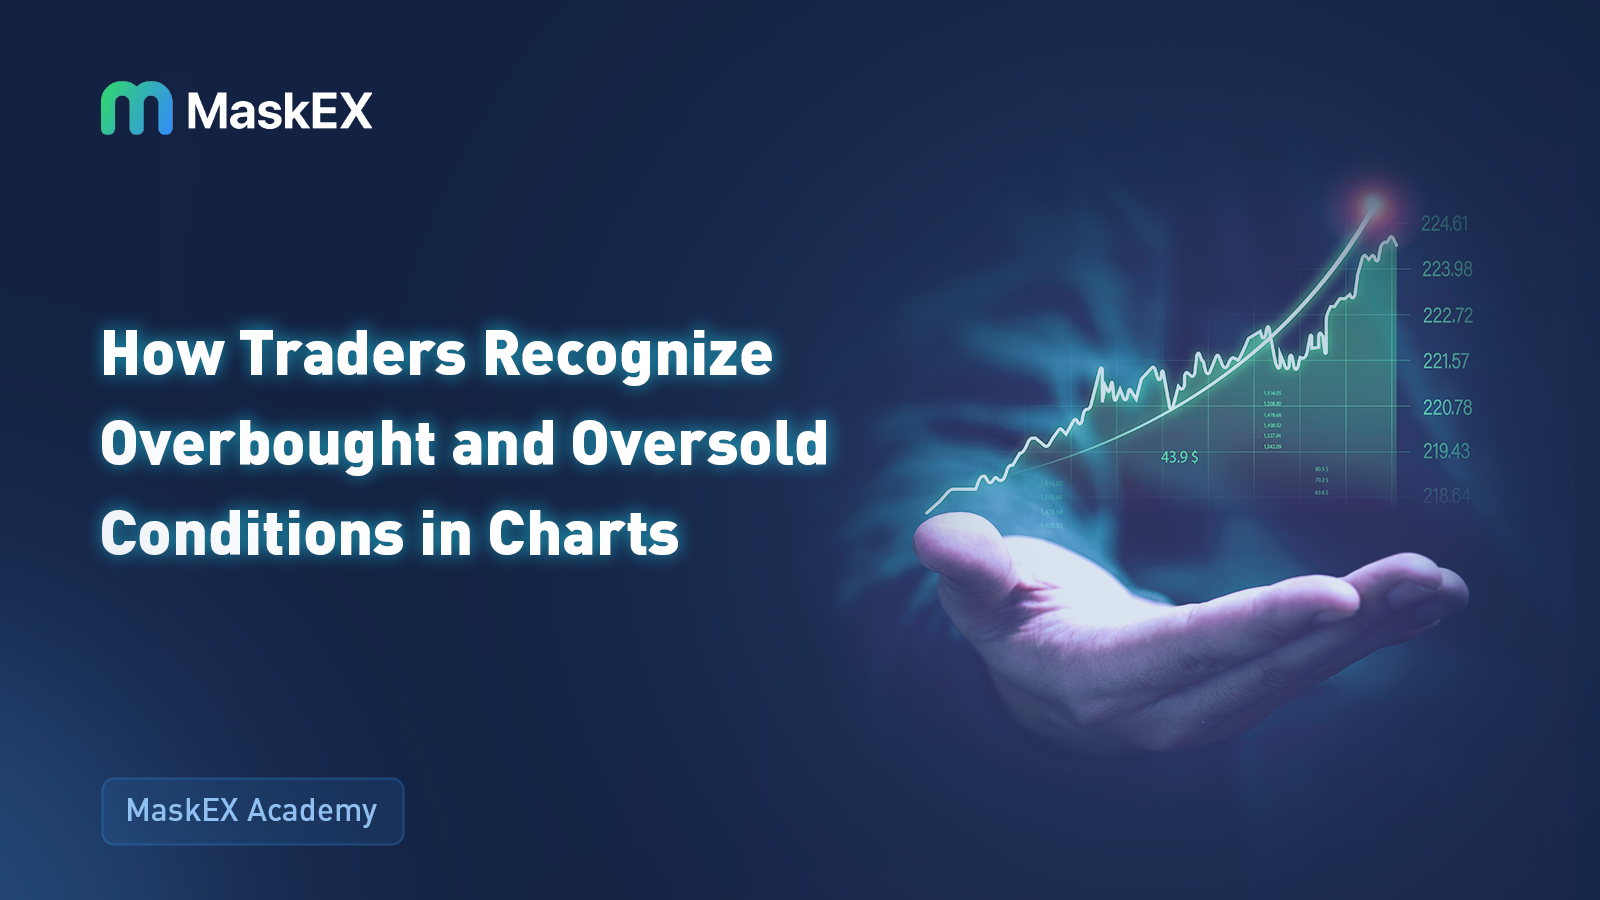 How Traders Recognize Overbought and Oversold Conditions in Charts